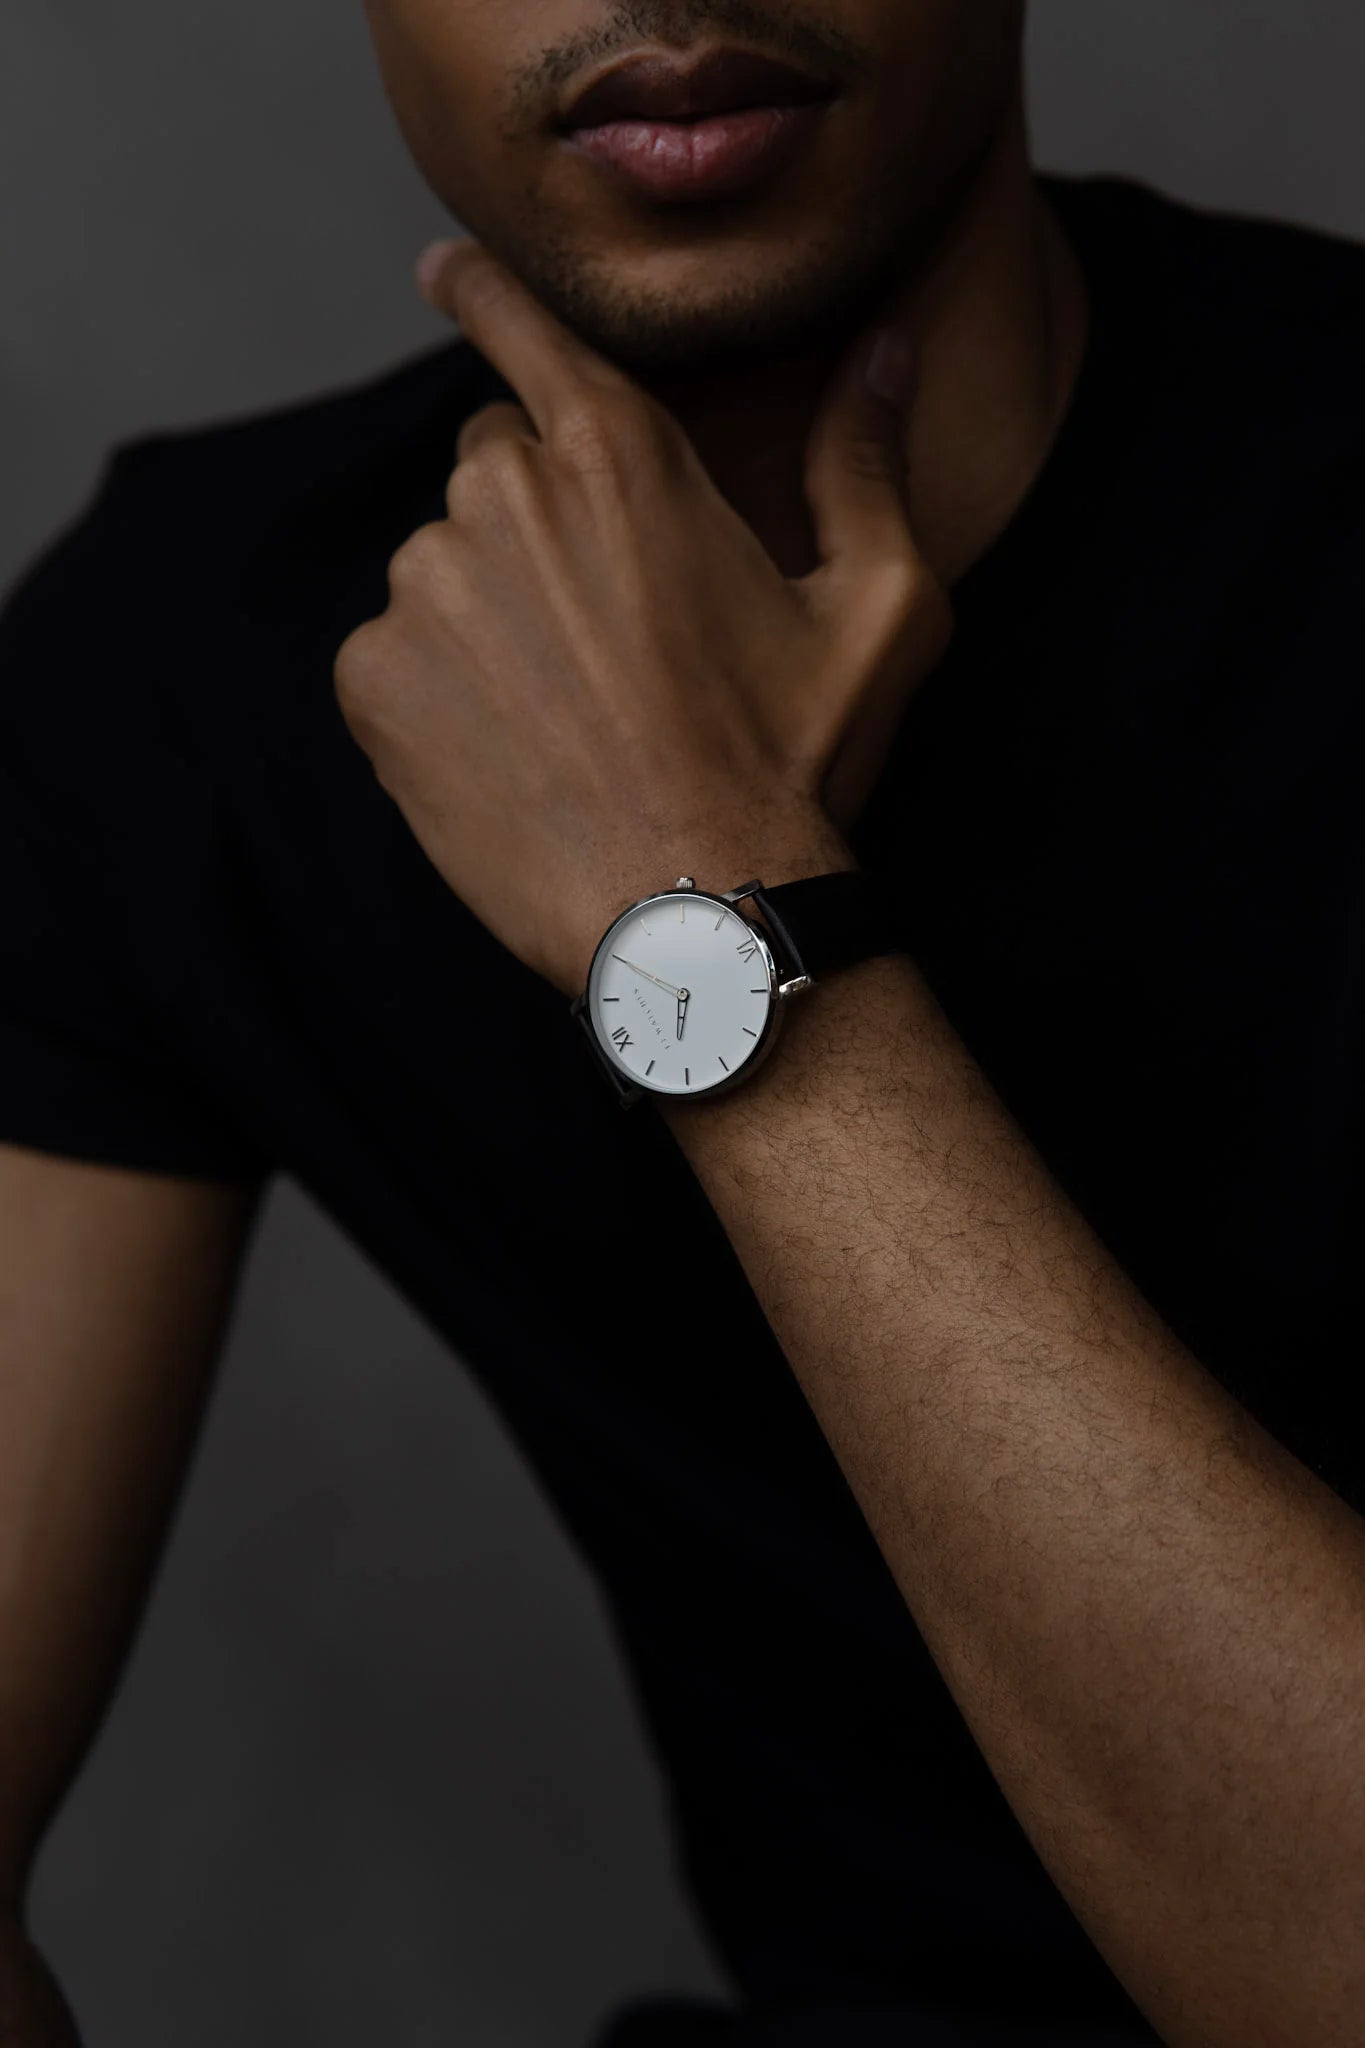 Discover the Silver sun set, a 42mm men's watch from Five Jwlry. Equipped with a minimalist white and silver dial. In this special edition, this watch comes with two leathers, one black leather and one brown. The perfect gift!